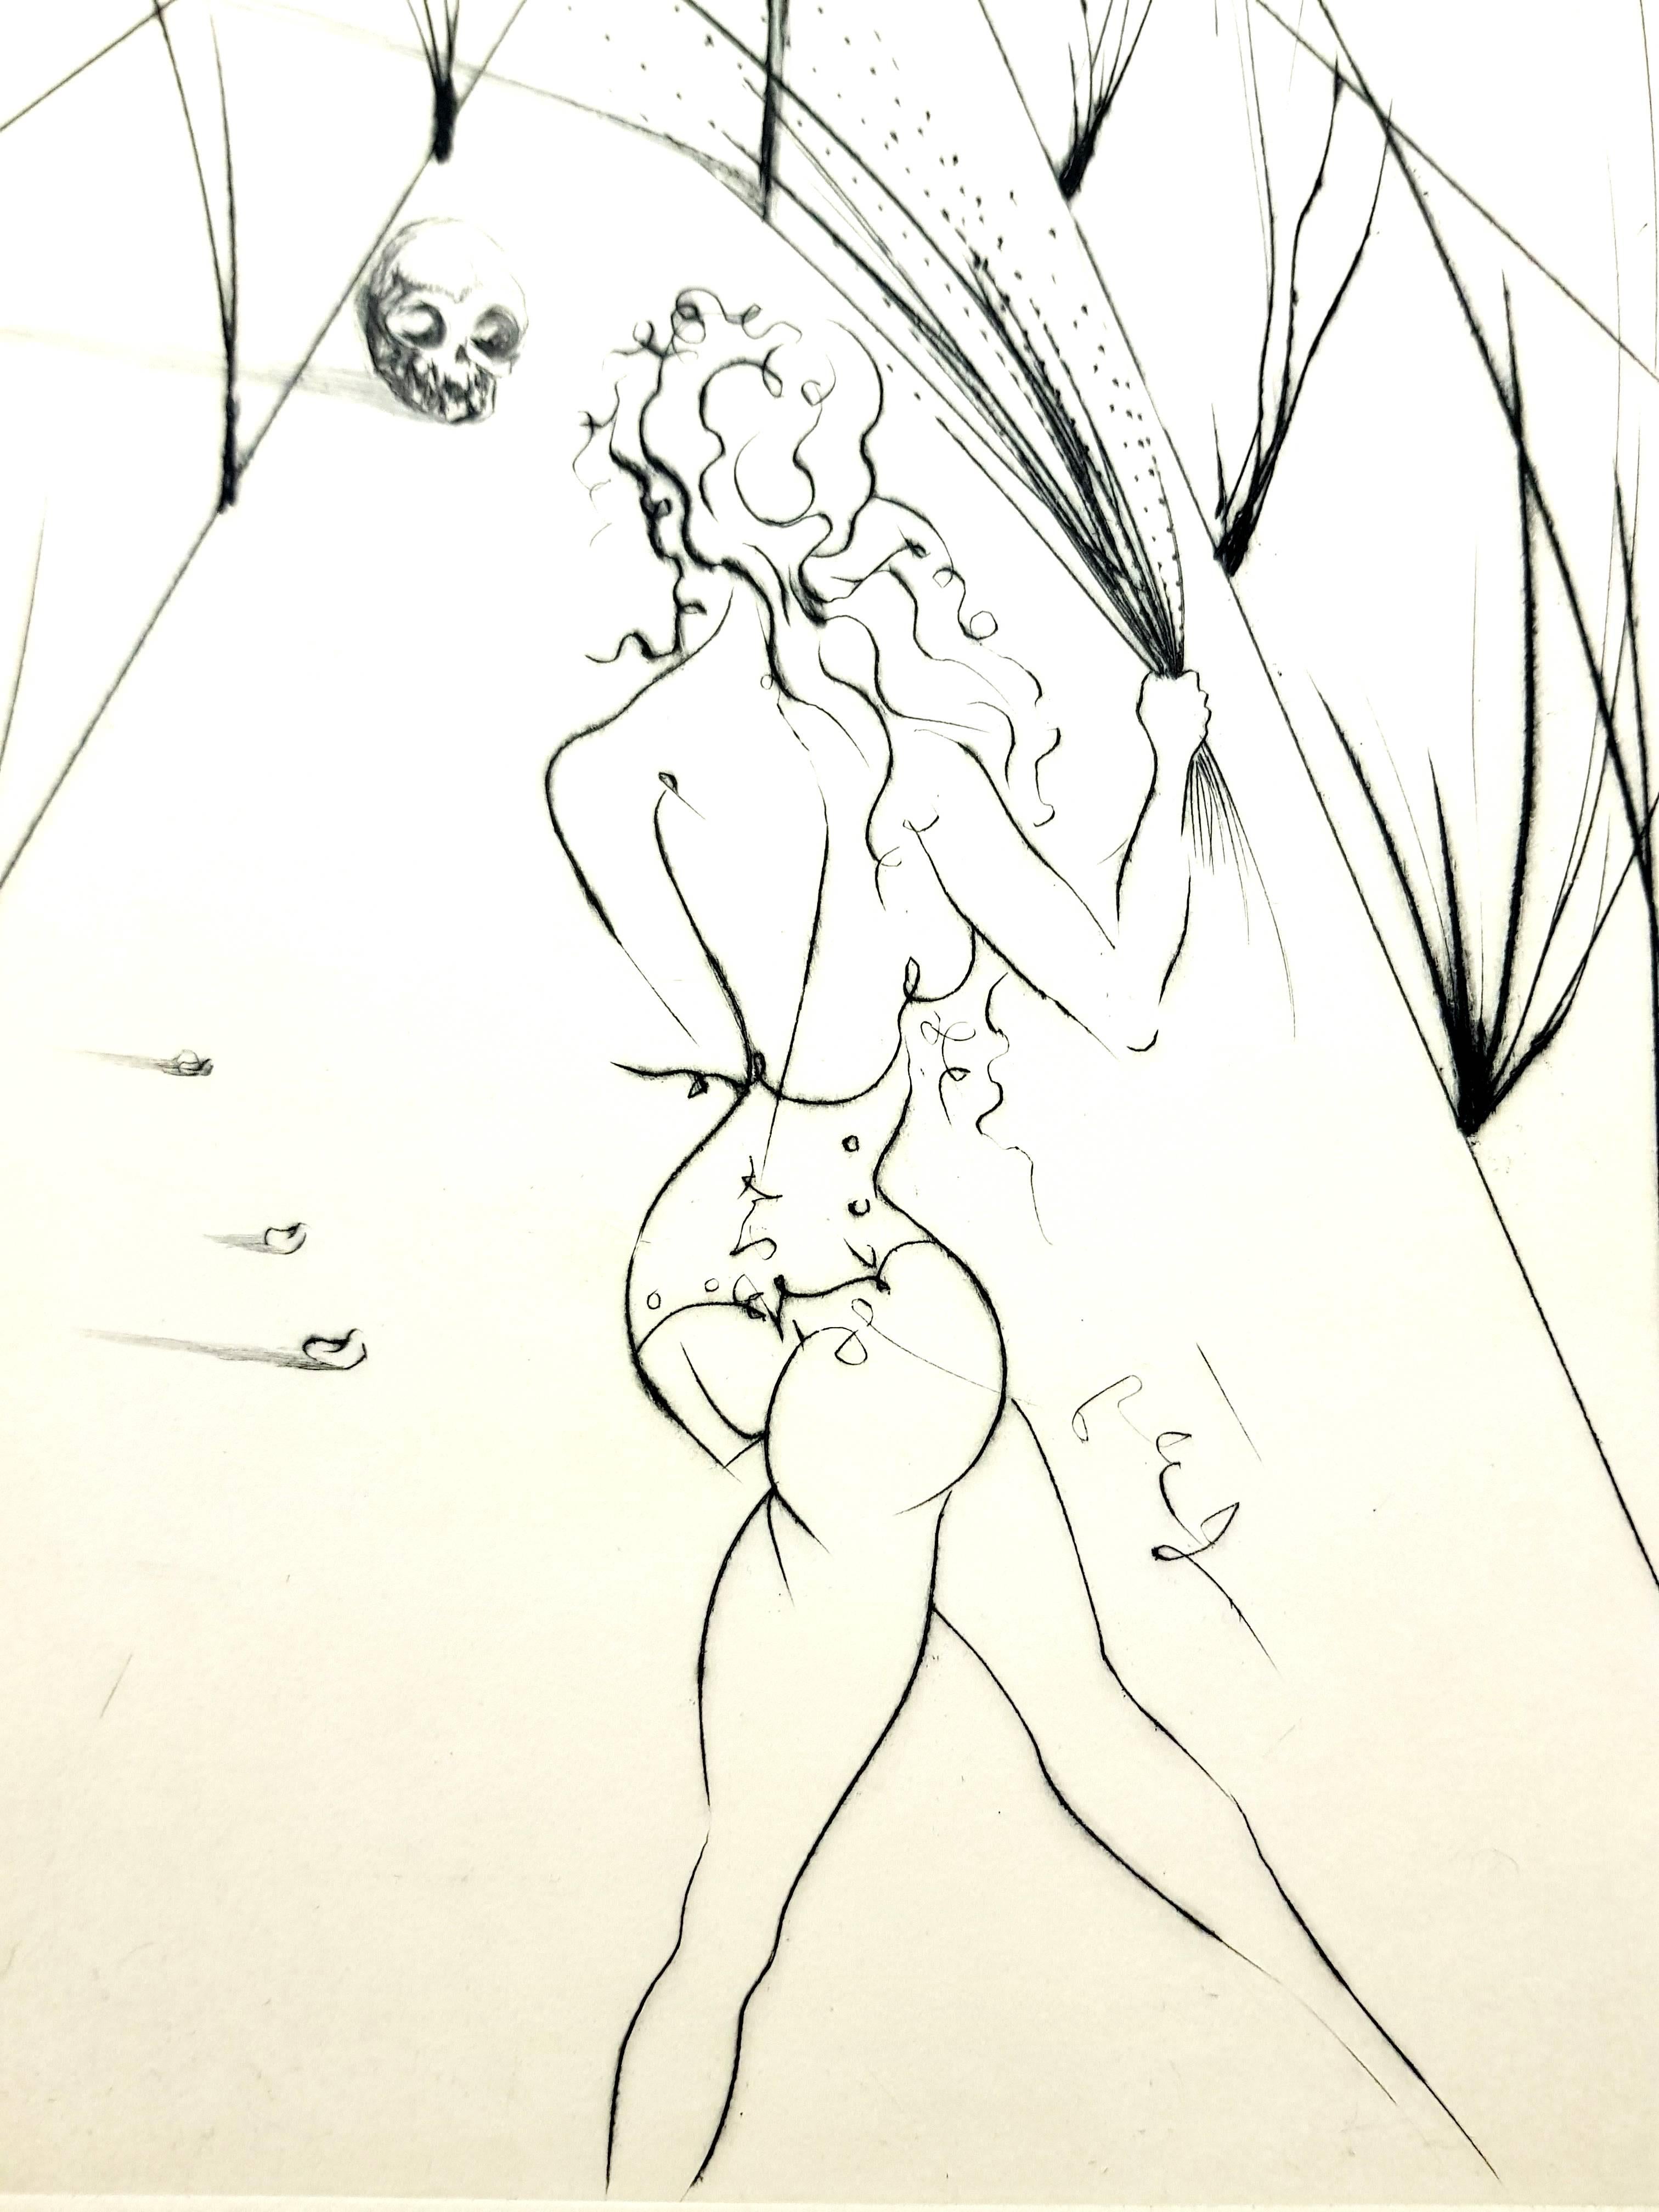 Salvador Dali - The Lane of the Birches - Original Stamp-Signed Etching - White Figurative Print by Salvador Dalí